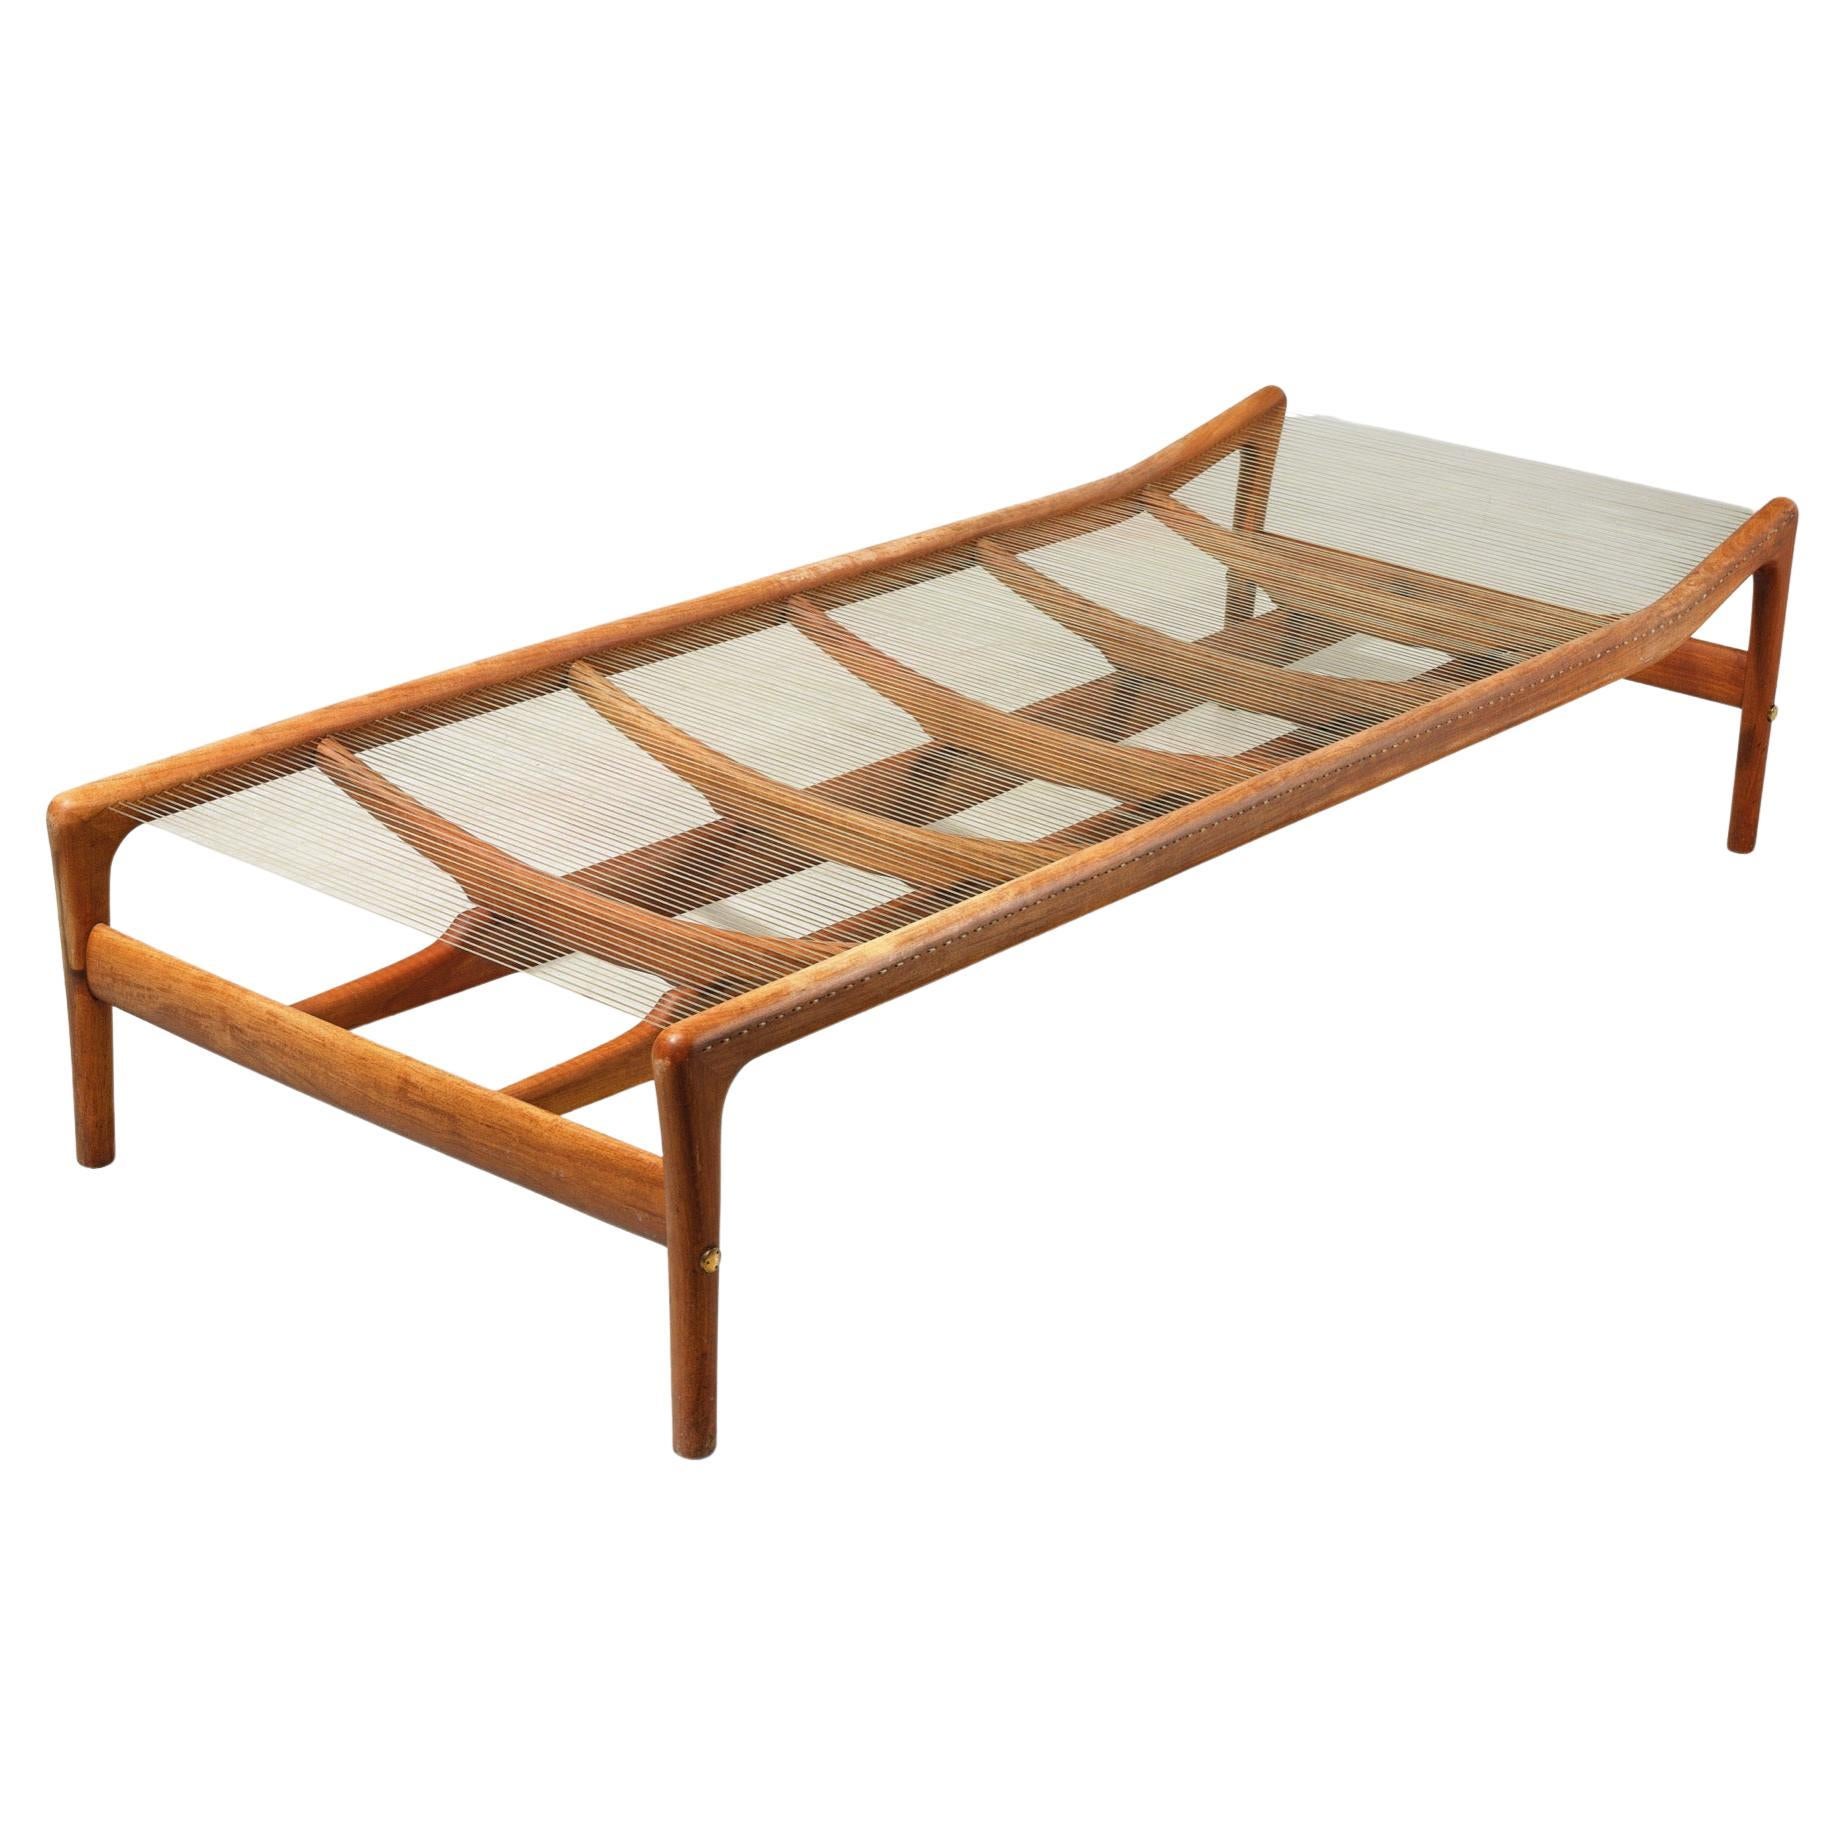 Outstanding Rare and Iconic Daybed by Helge Vestergaard Jensen